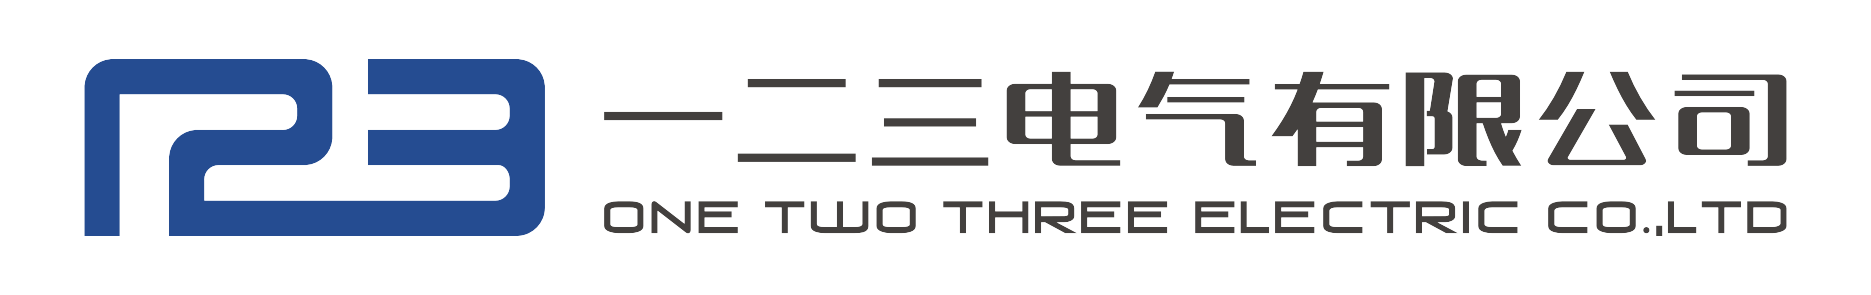 ONE TWO THREE ELECTRIC CO.,LTD